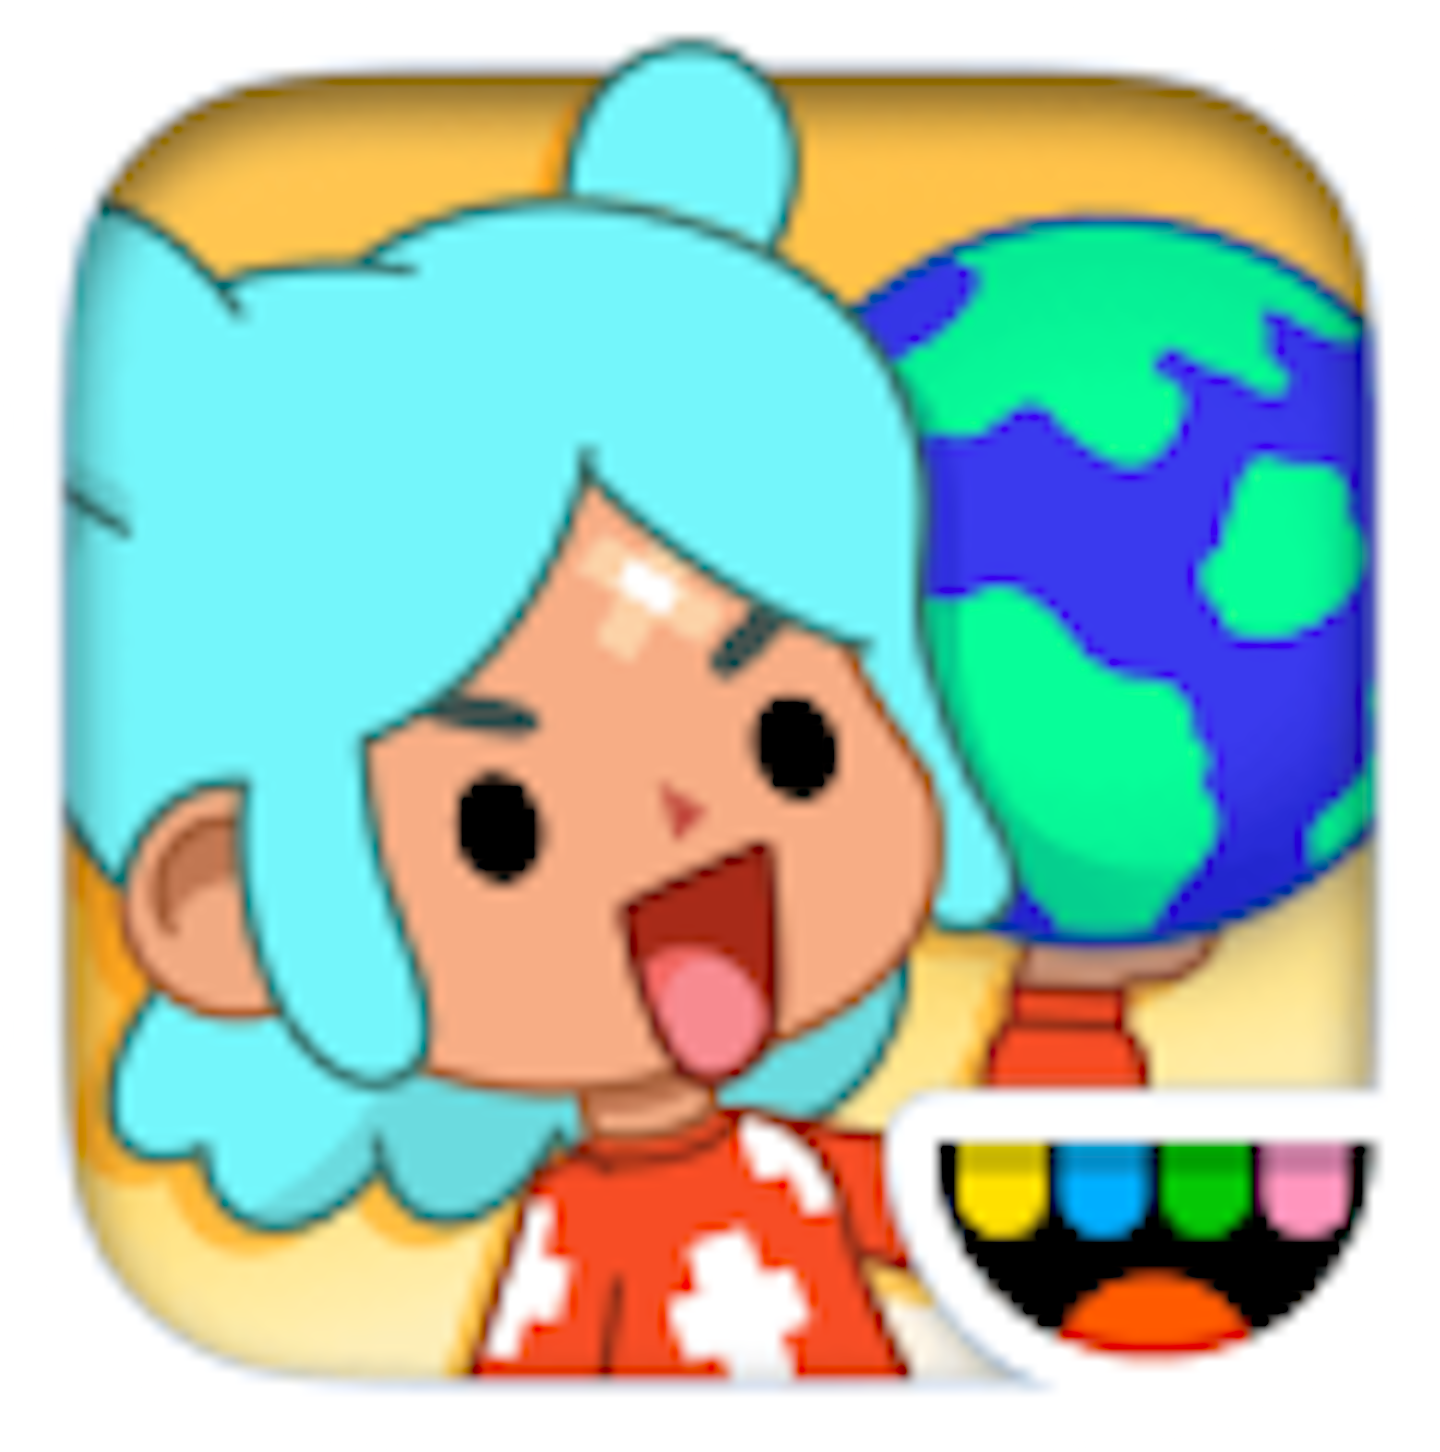 This is the app icon of Toca Boca World